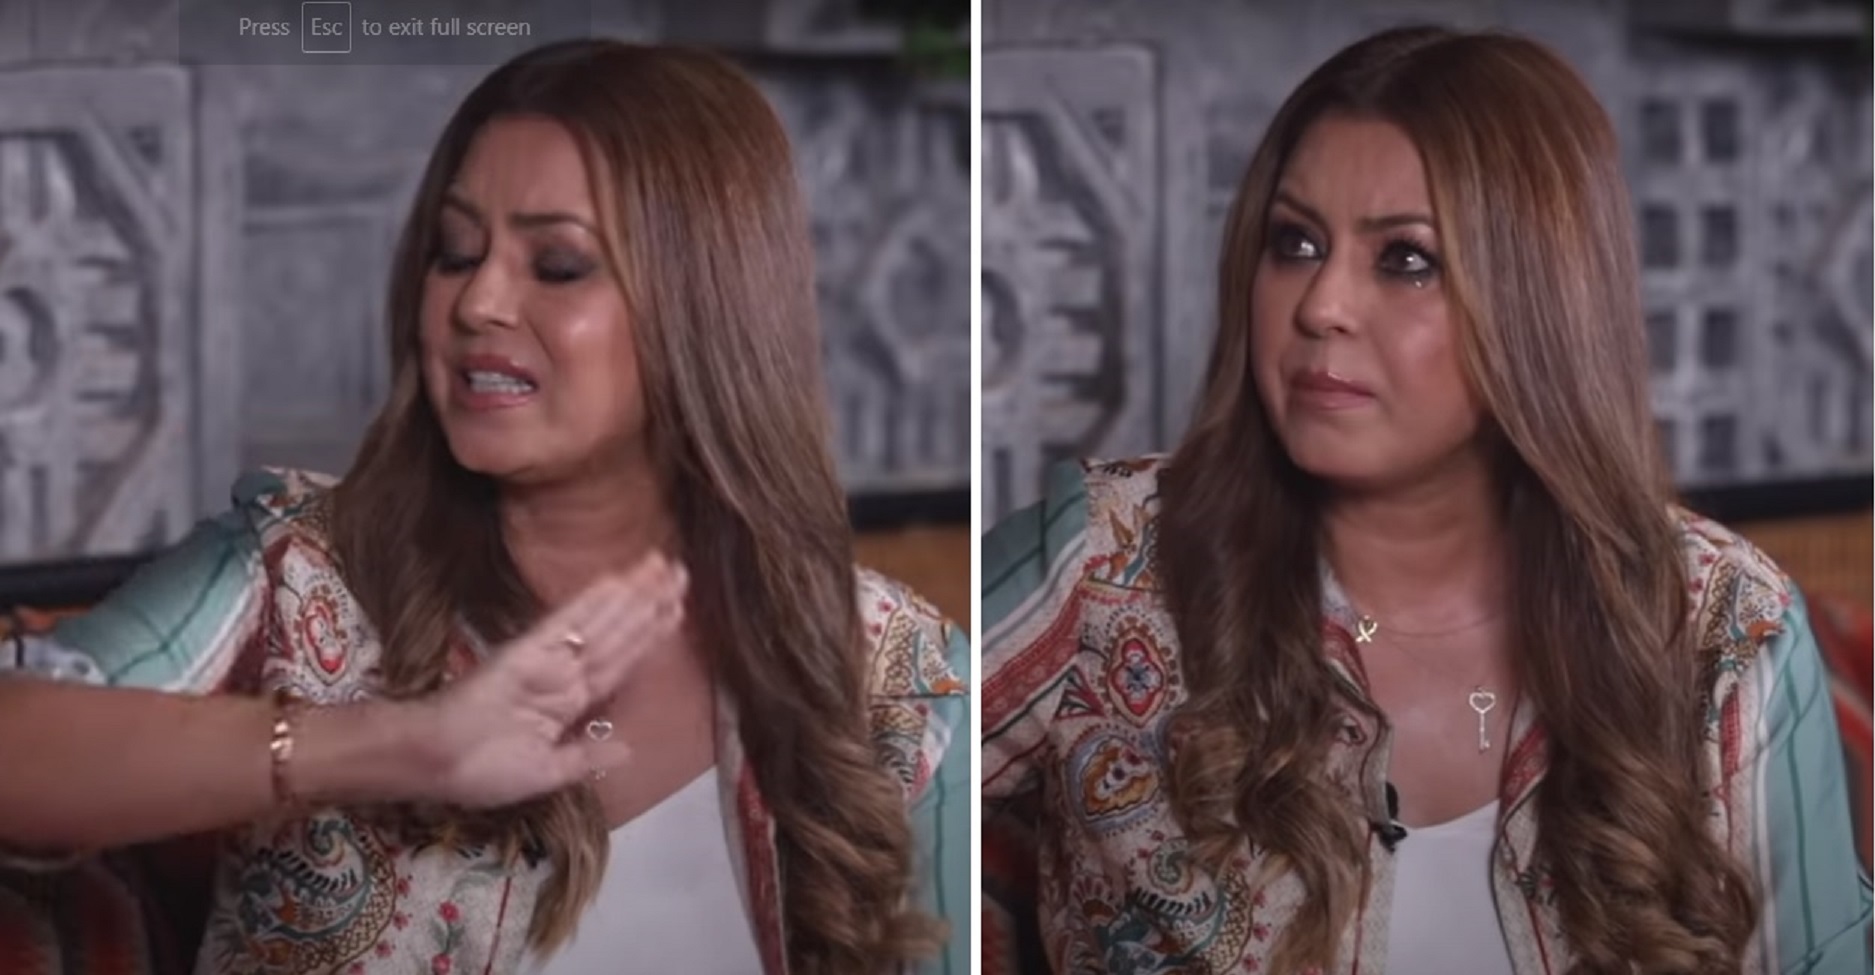 Mahima Chaudhary Becomes Emotional Remembering How Media Called Her ‘Scarface’ After Road Accident